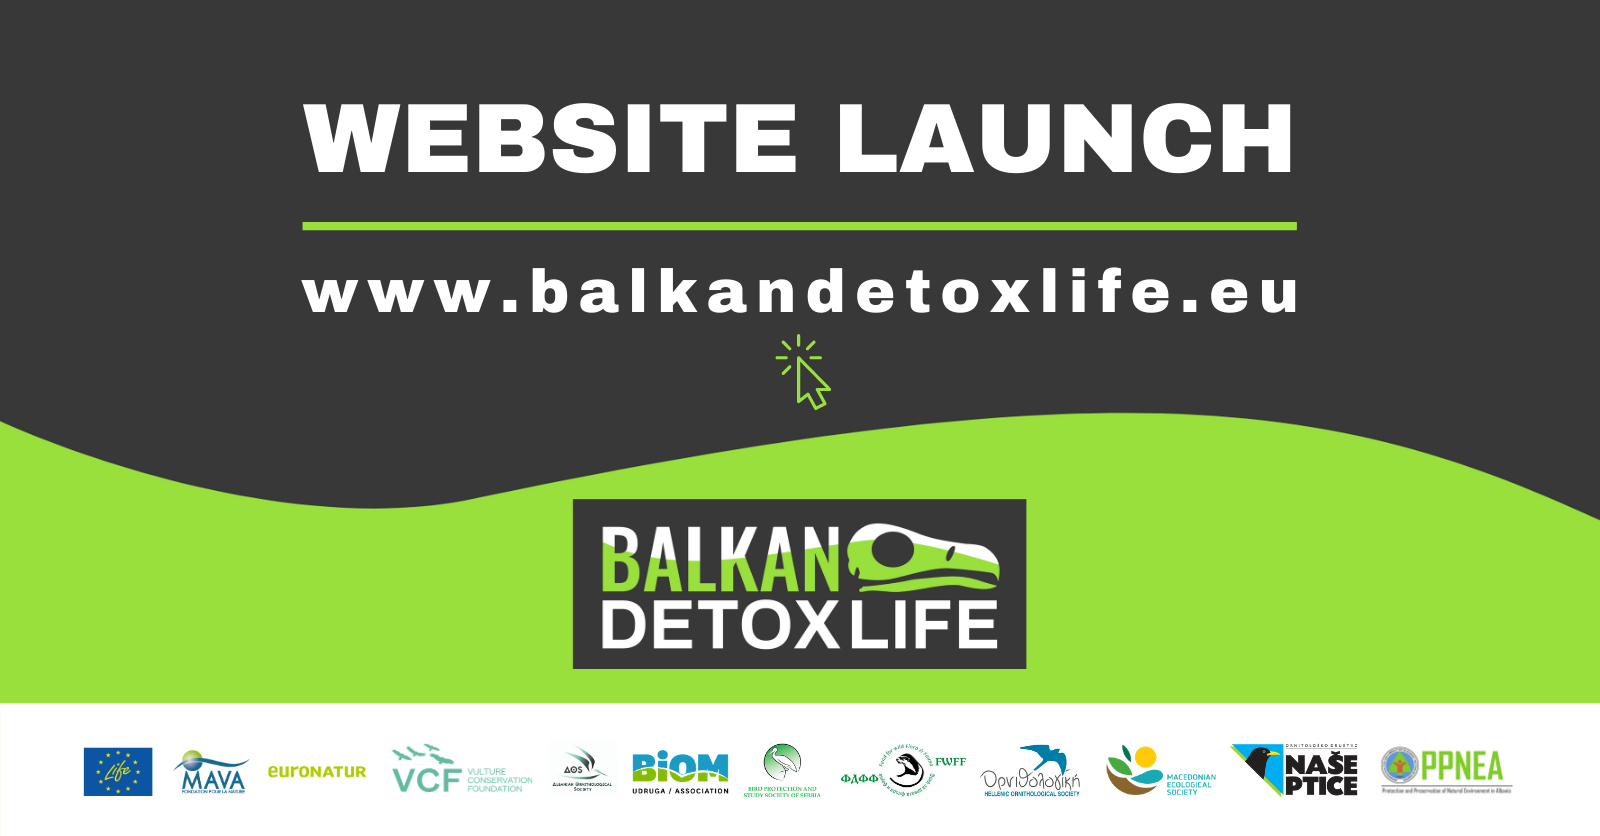 Check out the newly launched website of the BalkanDetox LIFE project